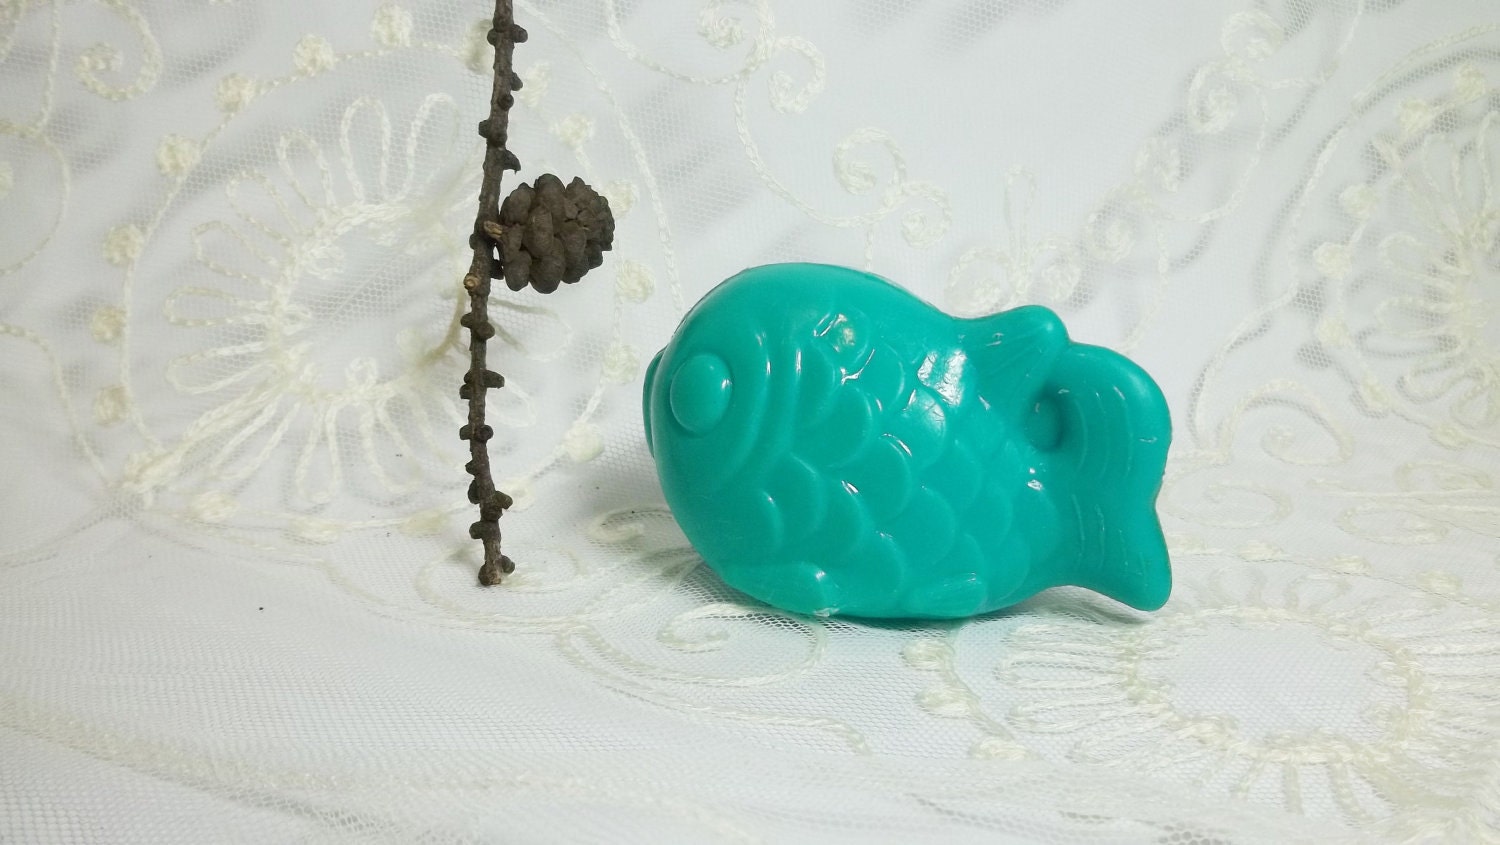 TOY FISH LOVELY vintage plastic turquoise toy . Use it for assemblage, mixed media art, home decor... - BabyshkasAttic